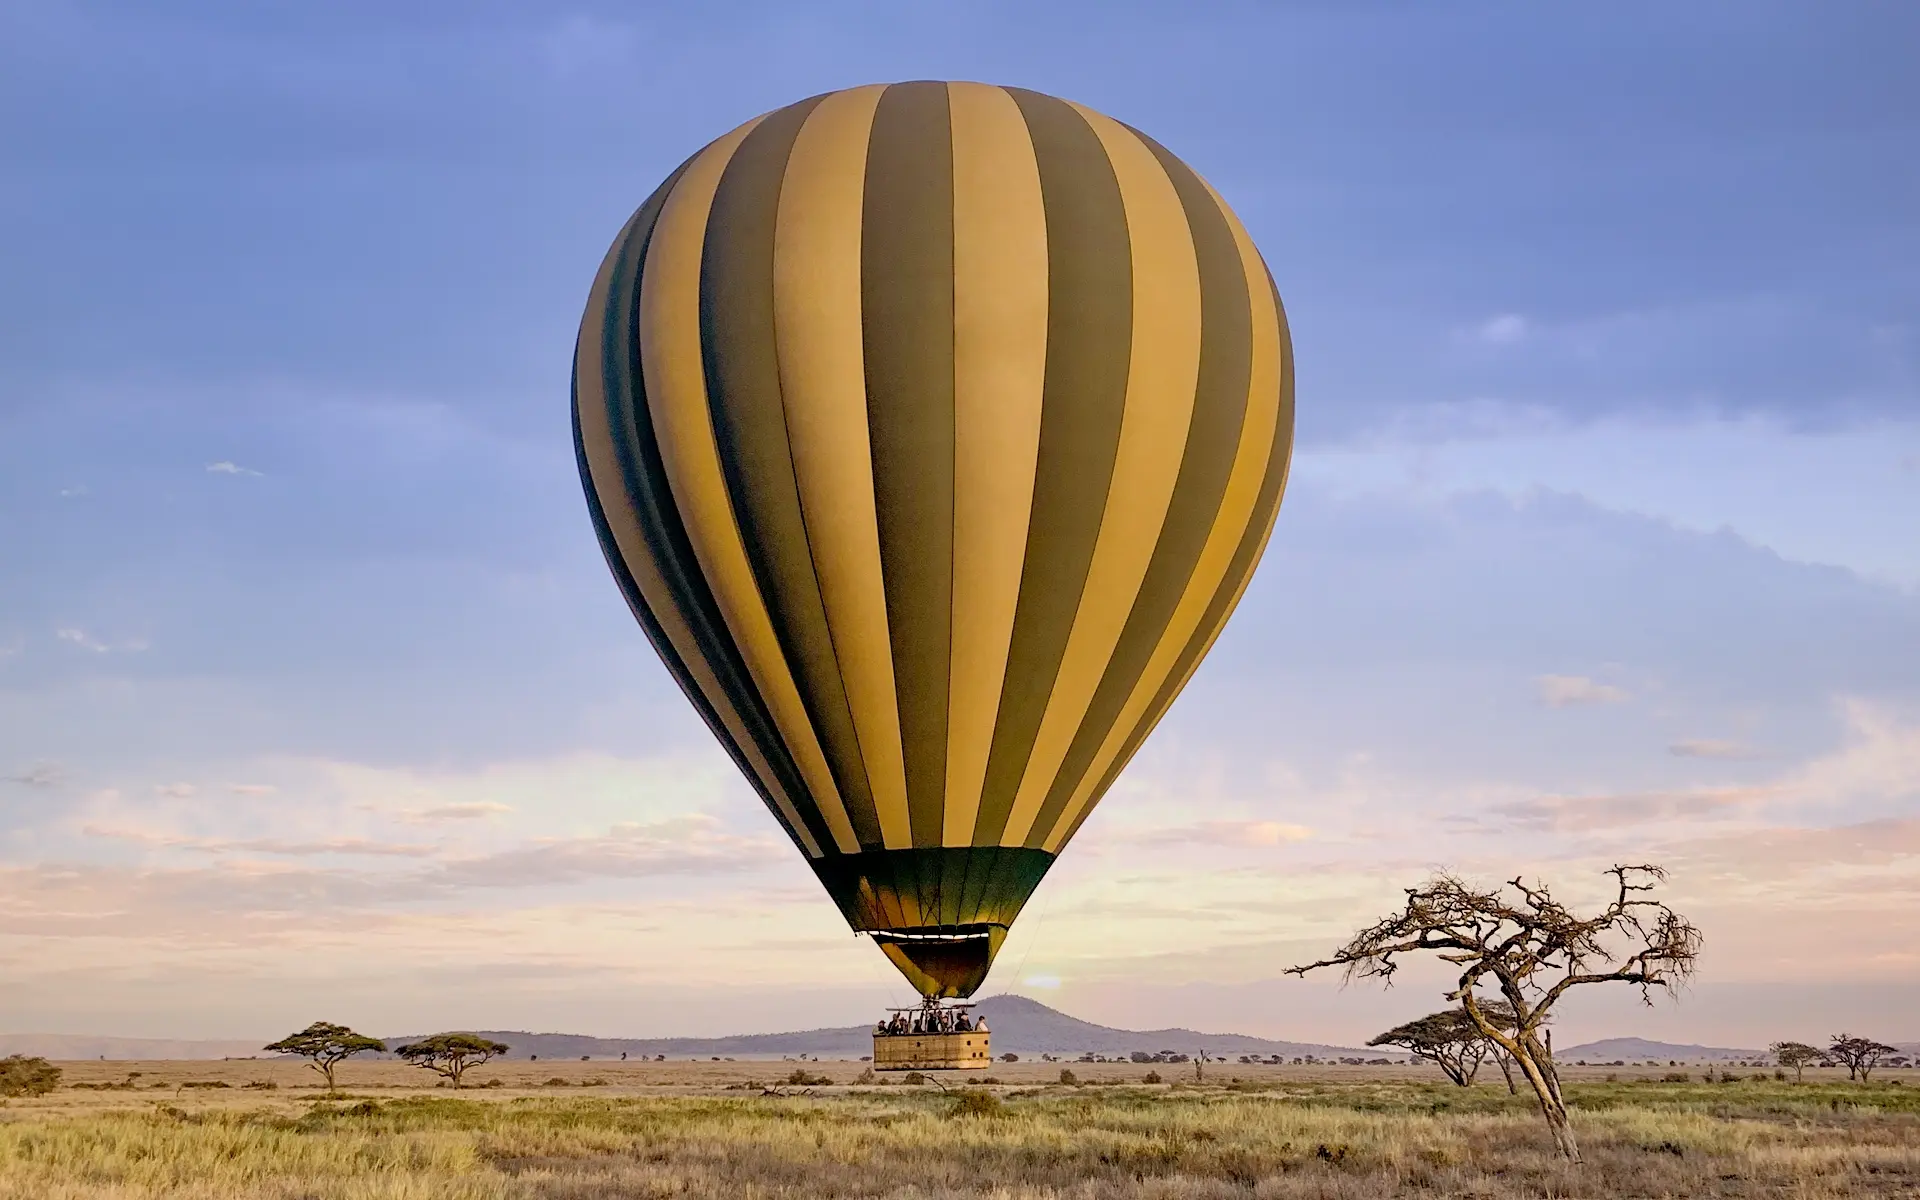 A hot air balloon soars above the vast savannah, offering a breathtaking view of the Serengeti.